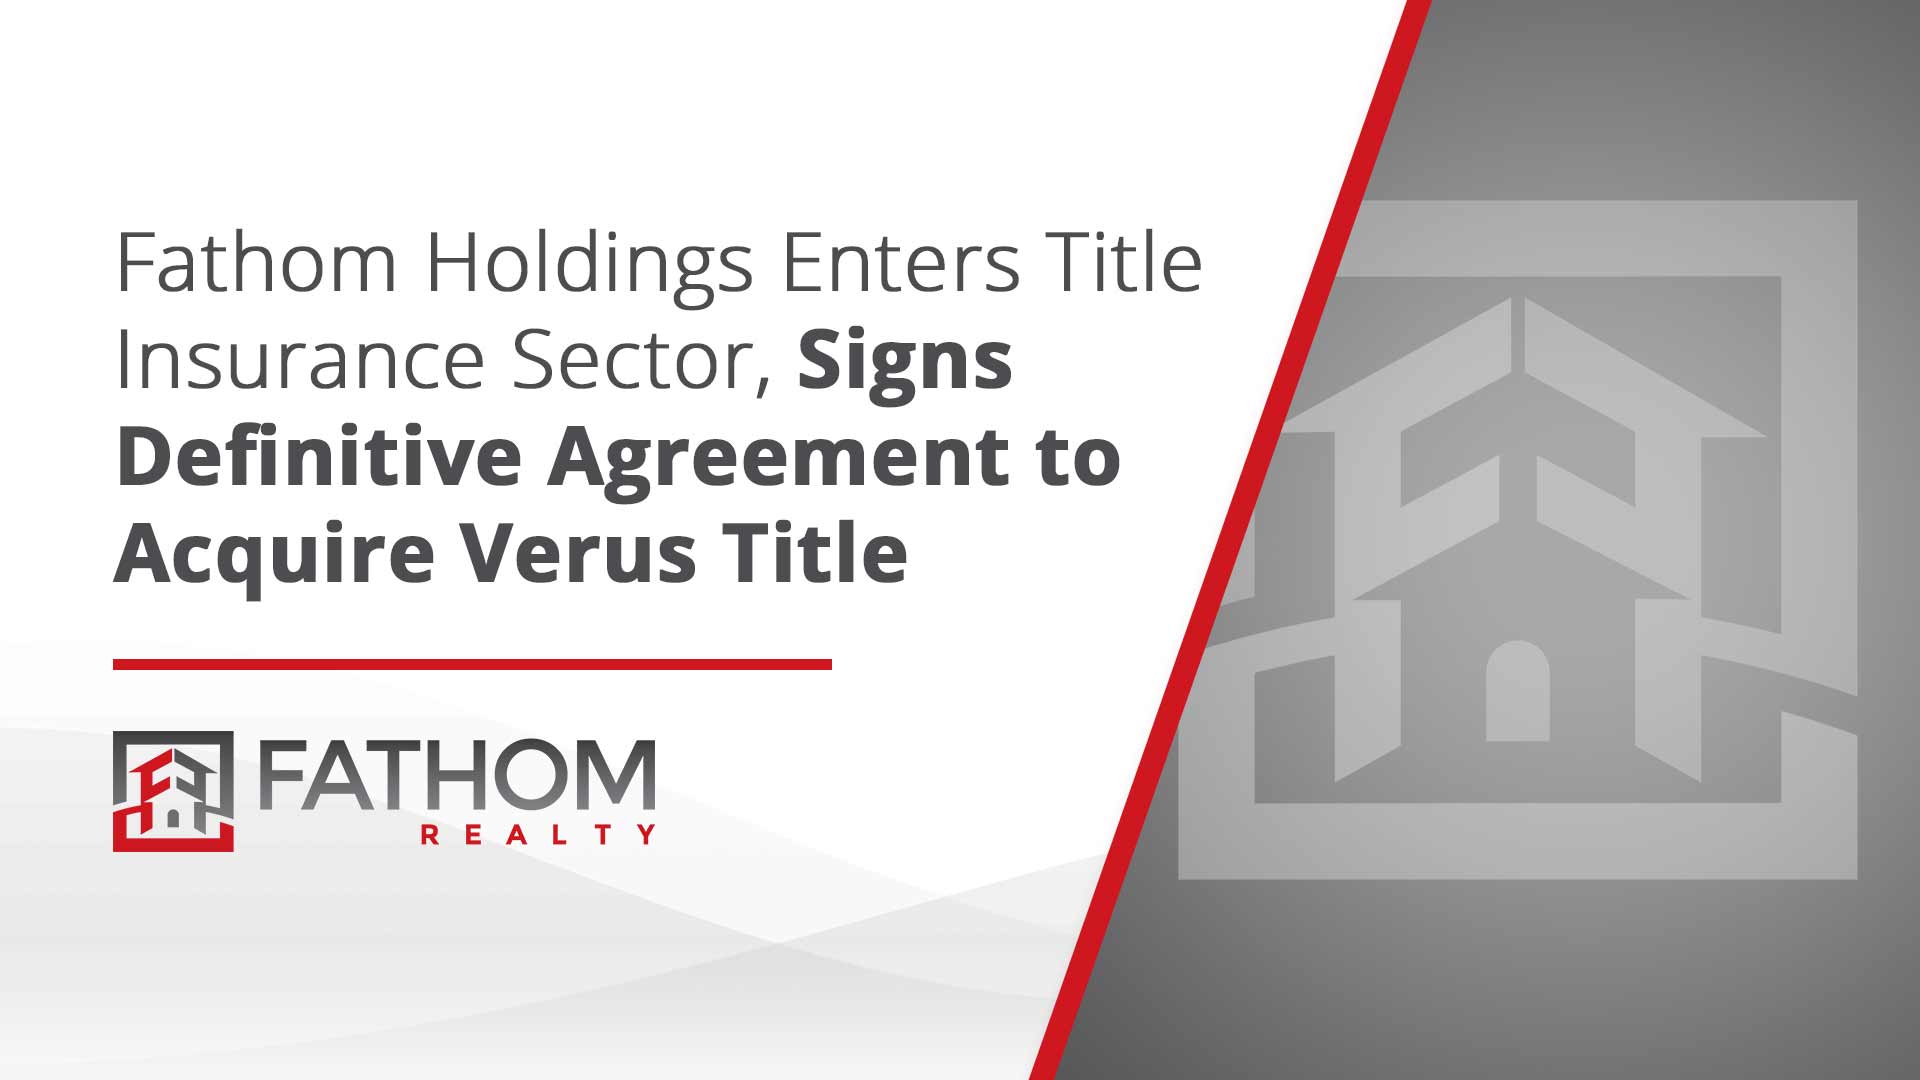 Featured image for “Fathom Holdings Enters Title Insurance Sector, Signs Definitive Agreement to Acquire Verus Title”